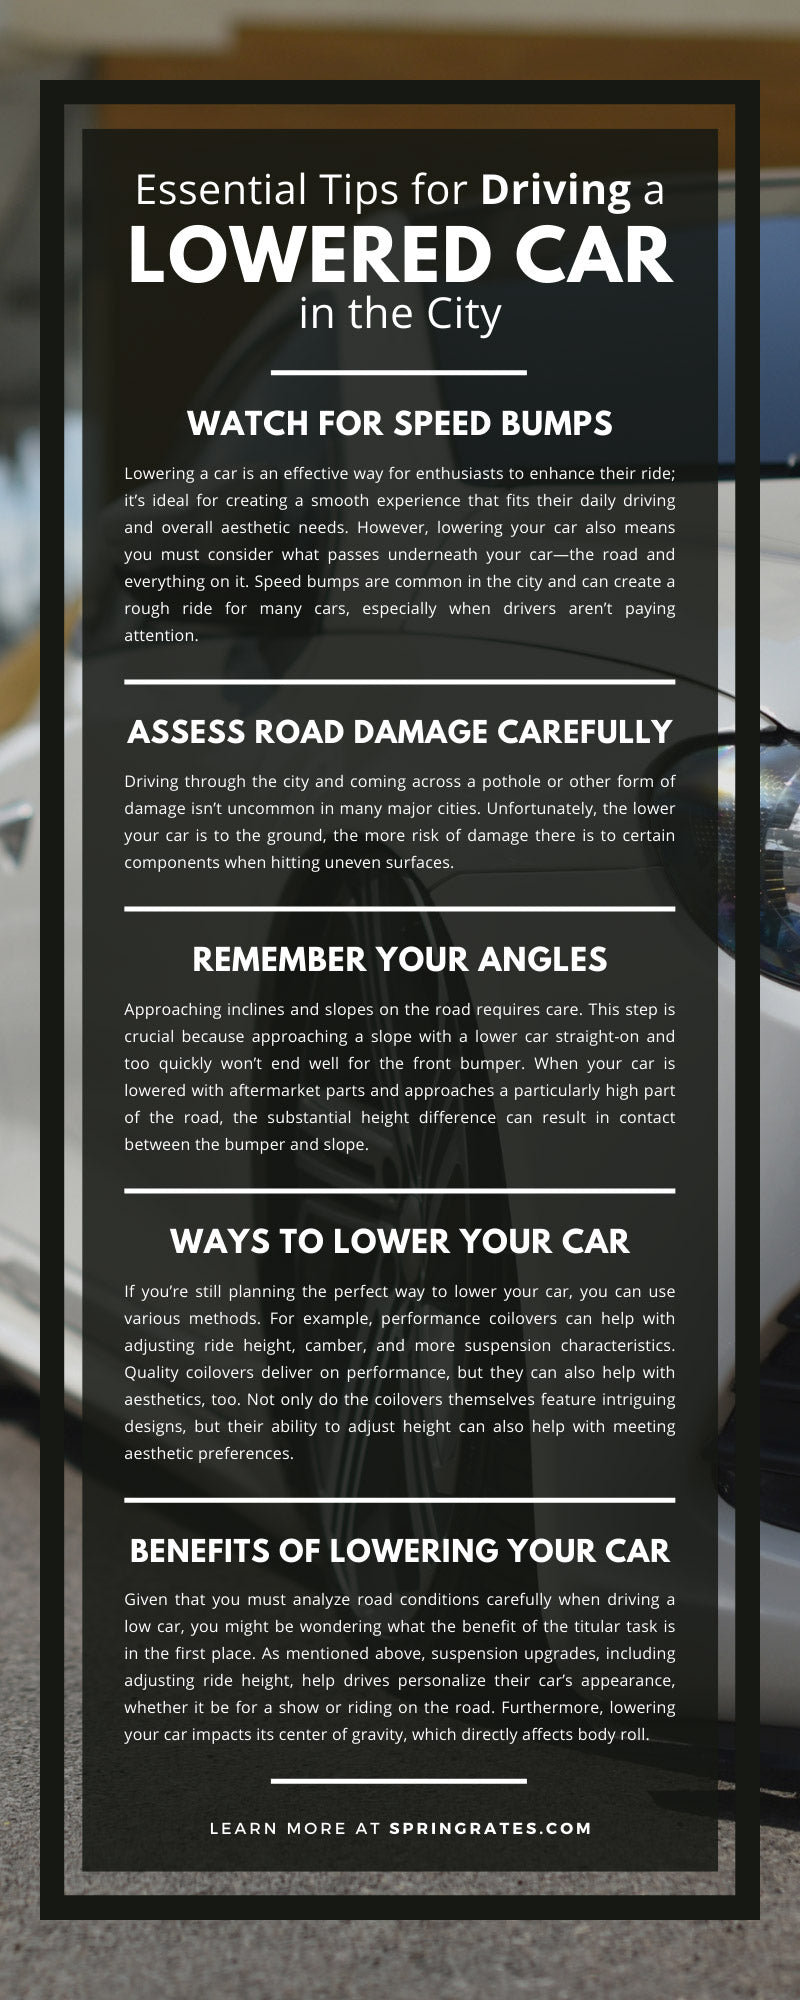 Essential Tips for Driving a Lowered Car in the City